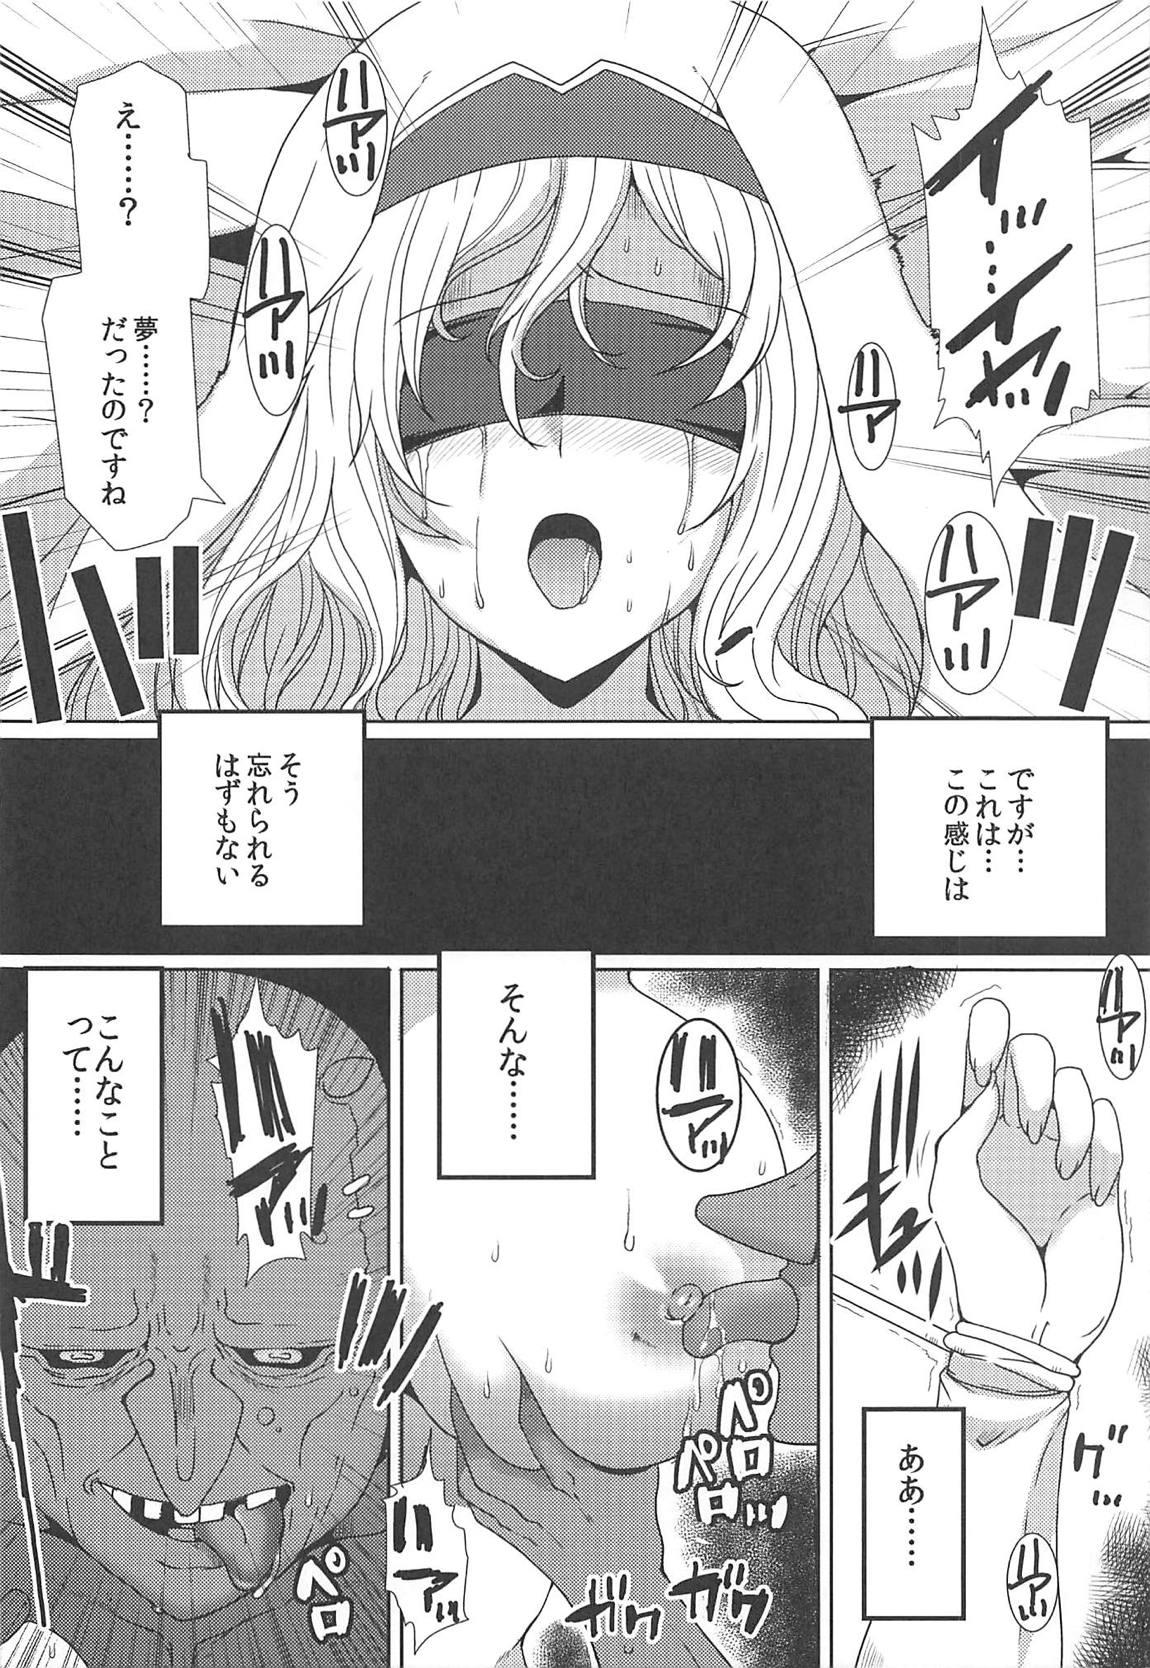 Camwhore Subete Yo wa Koto mo Nashi - All the world is things even without - Goblin slayer Stretching - Page 9